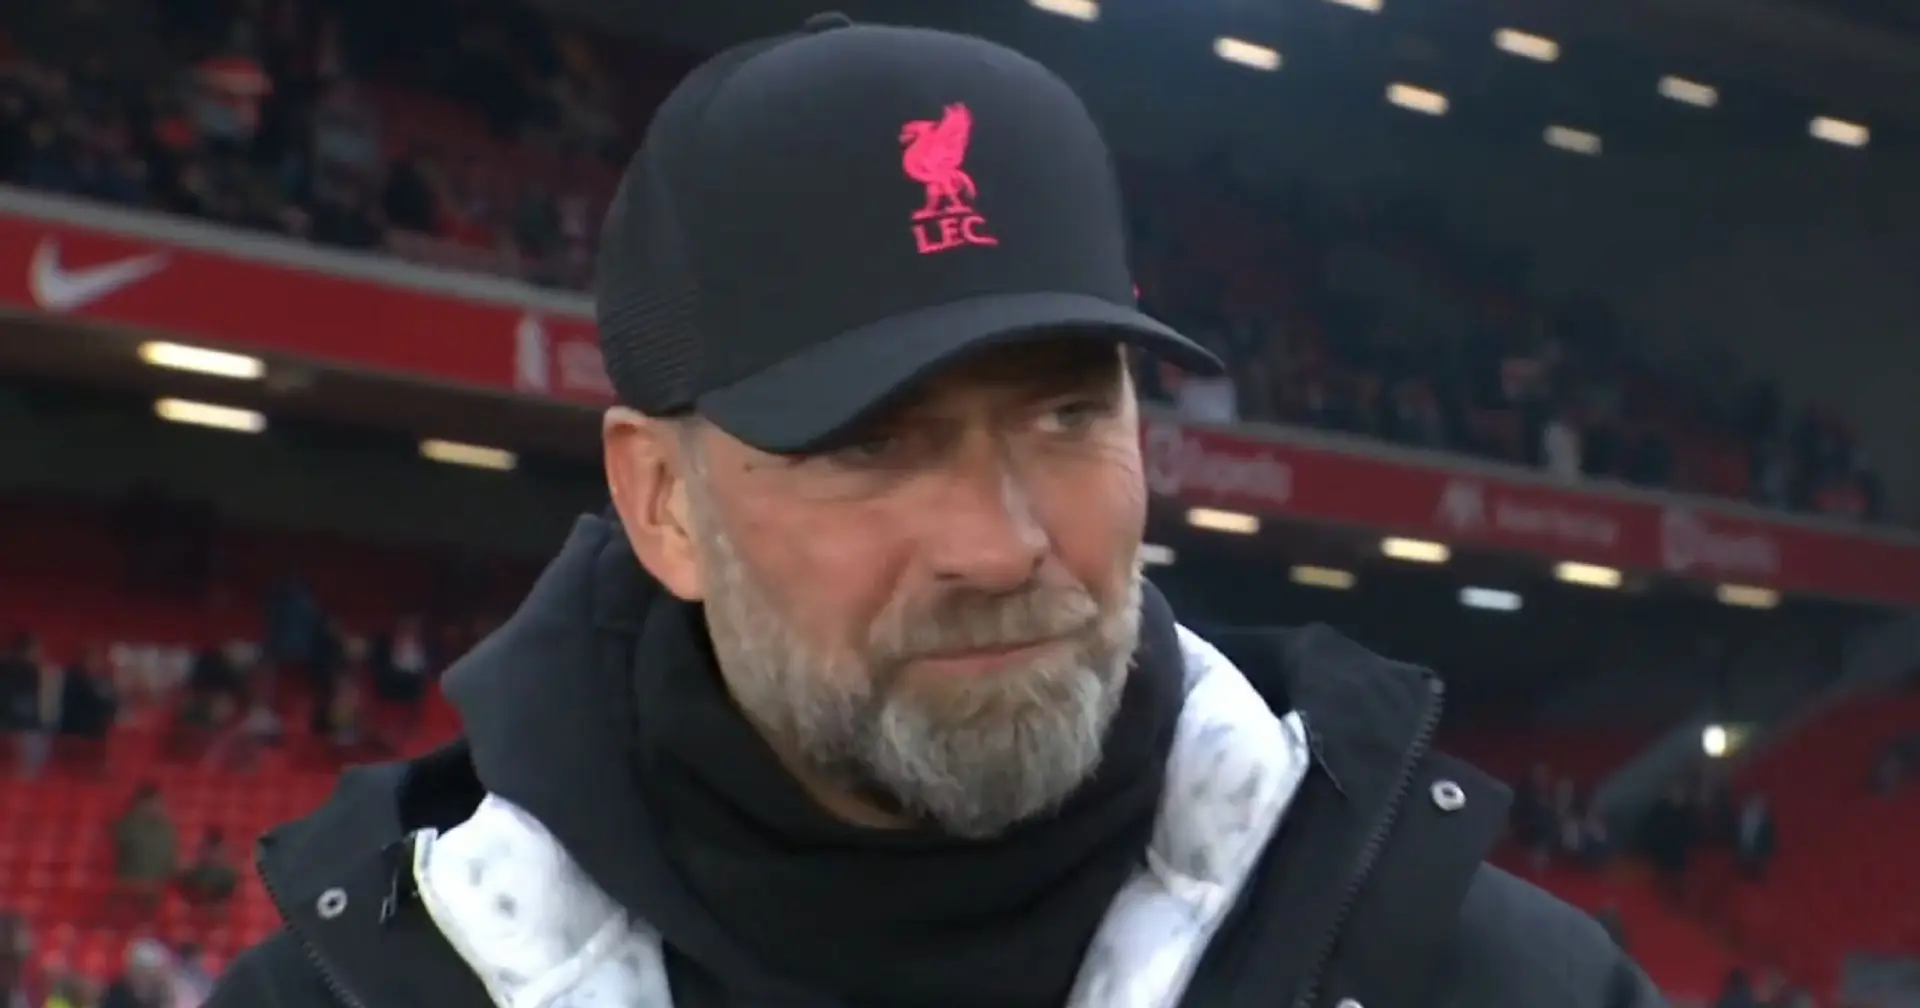 'I can't see myself beyond 70': Jurgen Klopp on how long he wants to be a coach